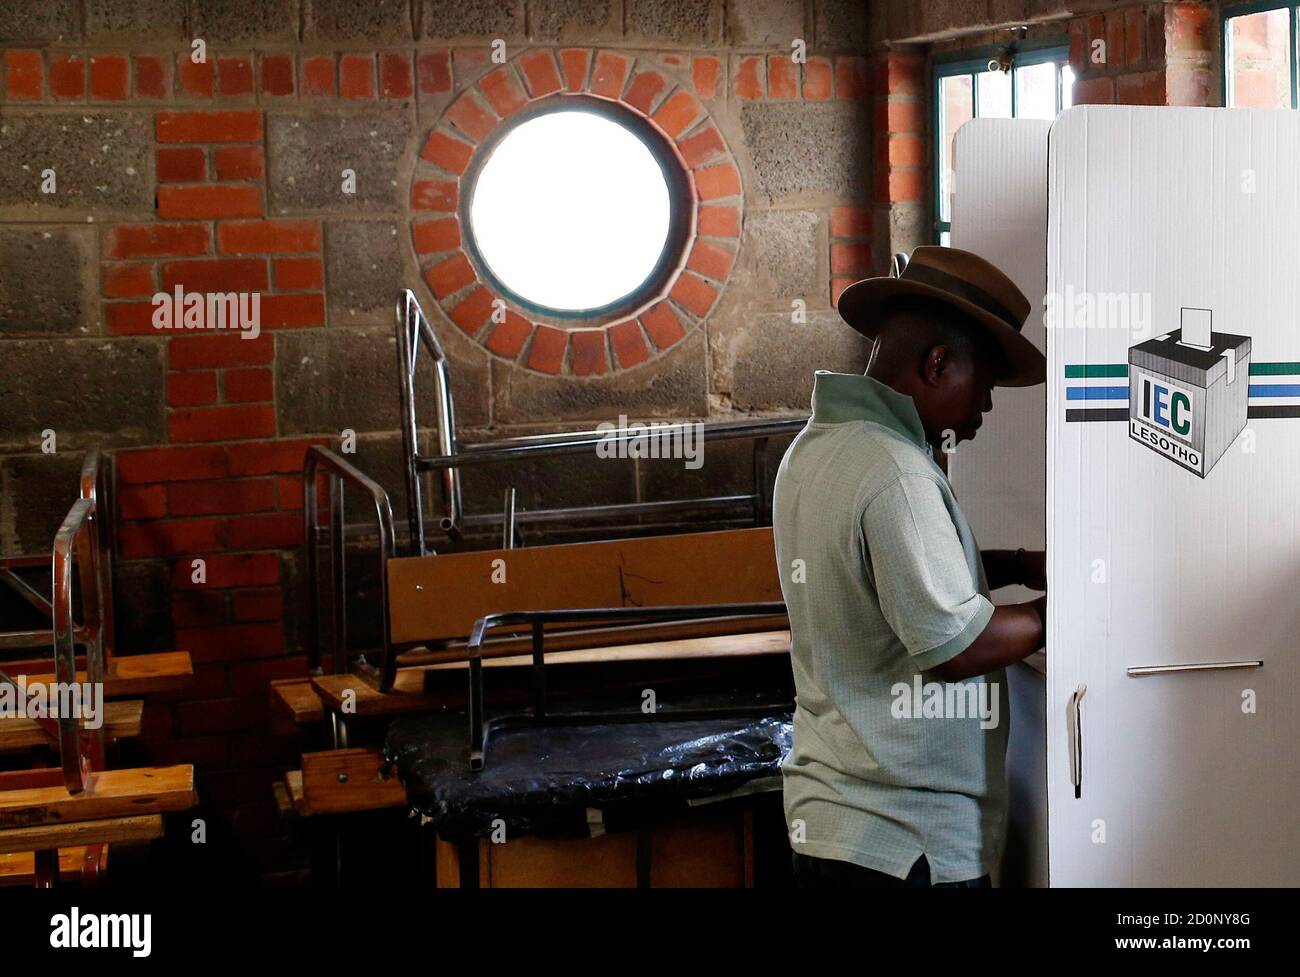 A local casts his vote during the national election in Qoaling village, outside the capital Maseru February 28, 2015. The people of Lesotho voted on Saturday in a tense election they hope will restore stability six months after an attempted coup in the southern African nation.The vote is being held around two years ahead of schedule under a political deal brokered by South African deputy president Cyril Ramaphosa. REUTERS/Siphiwe Sibeko (LESOTHO - Tags: POLITICS ELECTIONS) Stock Photo